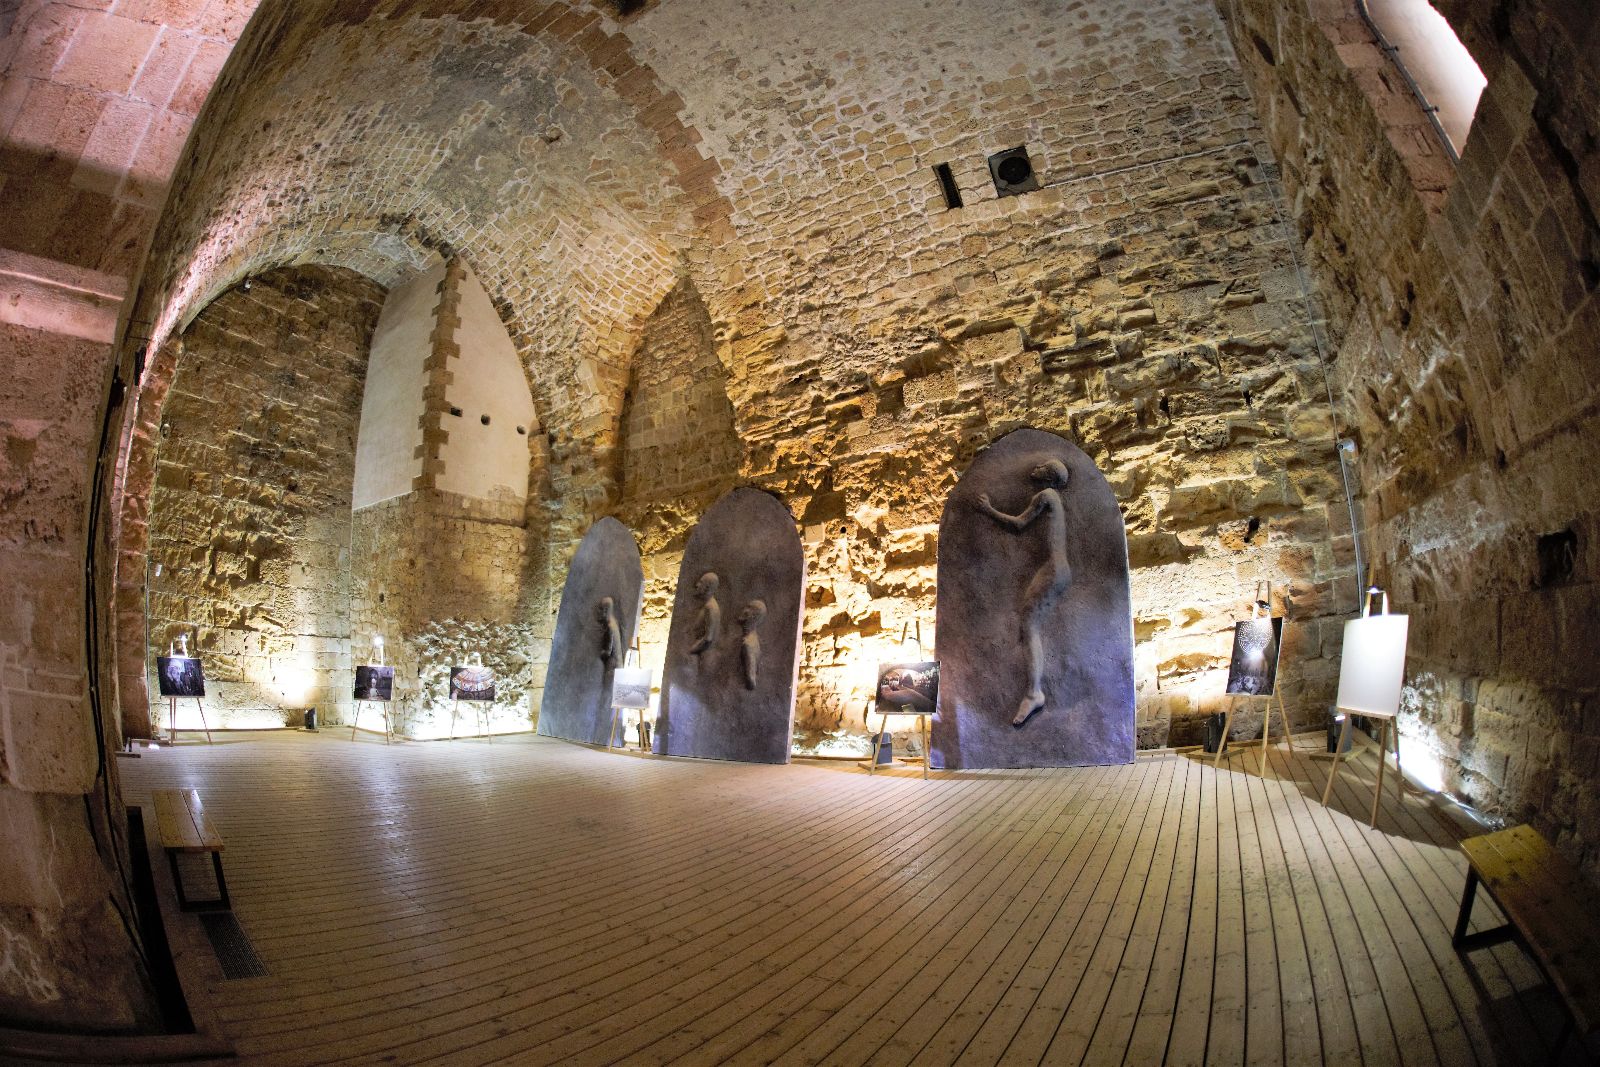 Knights' Halls (Citadel of Acre), Old City of Acre